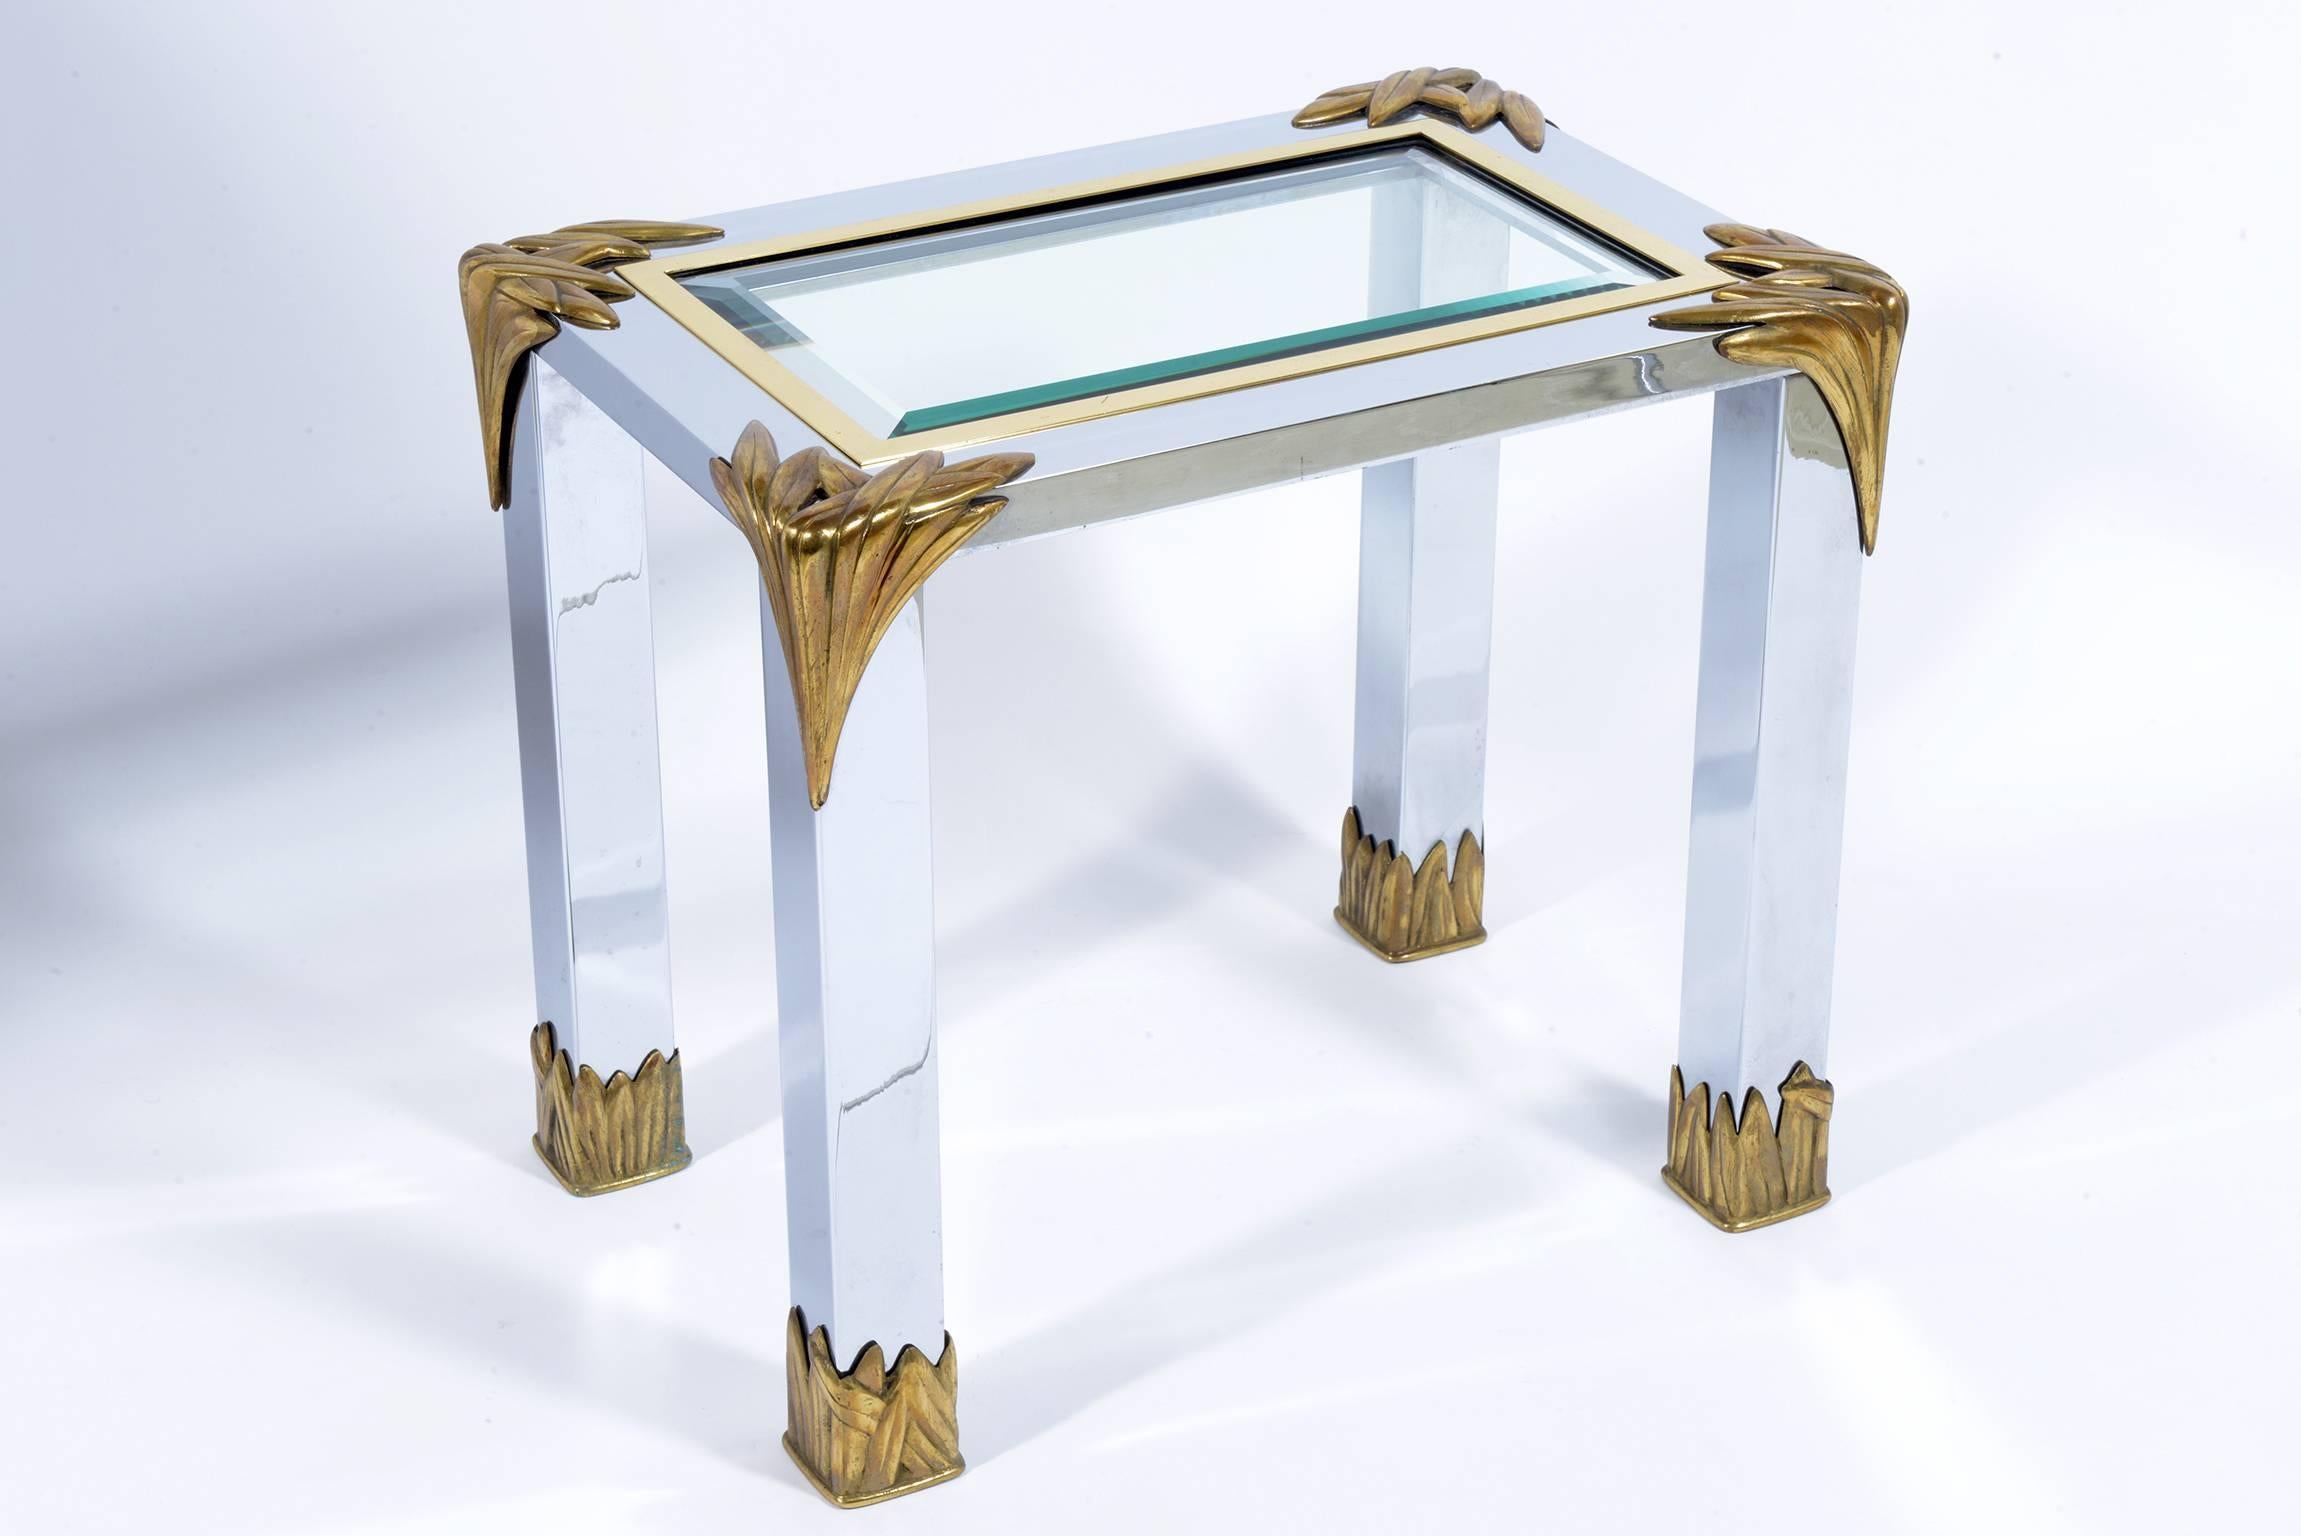 Pair of steel structure side table with vegetable cut brass gold details in the corner and feet, thick beveled glass top.
This high quality tables or nightstands where produce by Banci Firenze during the 1970s Italia Mid-Century Modern.